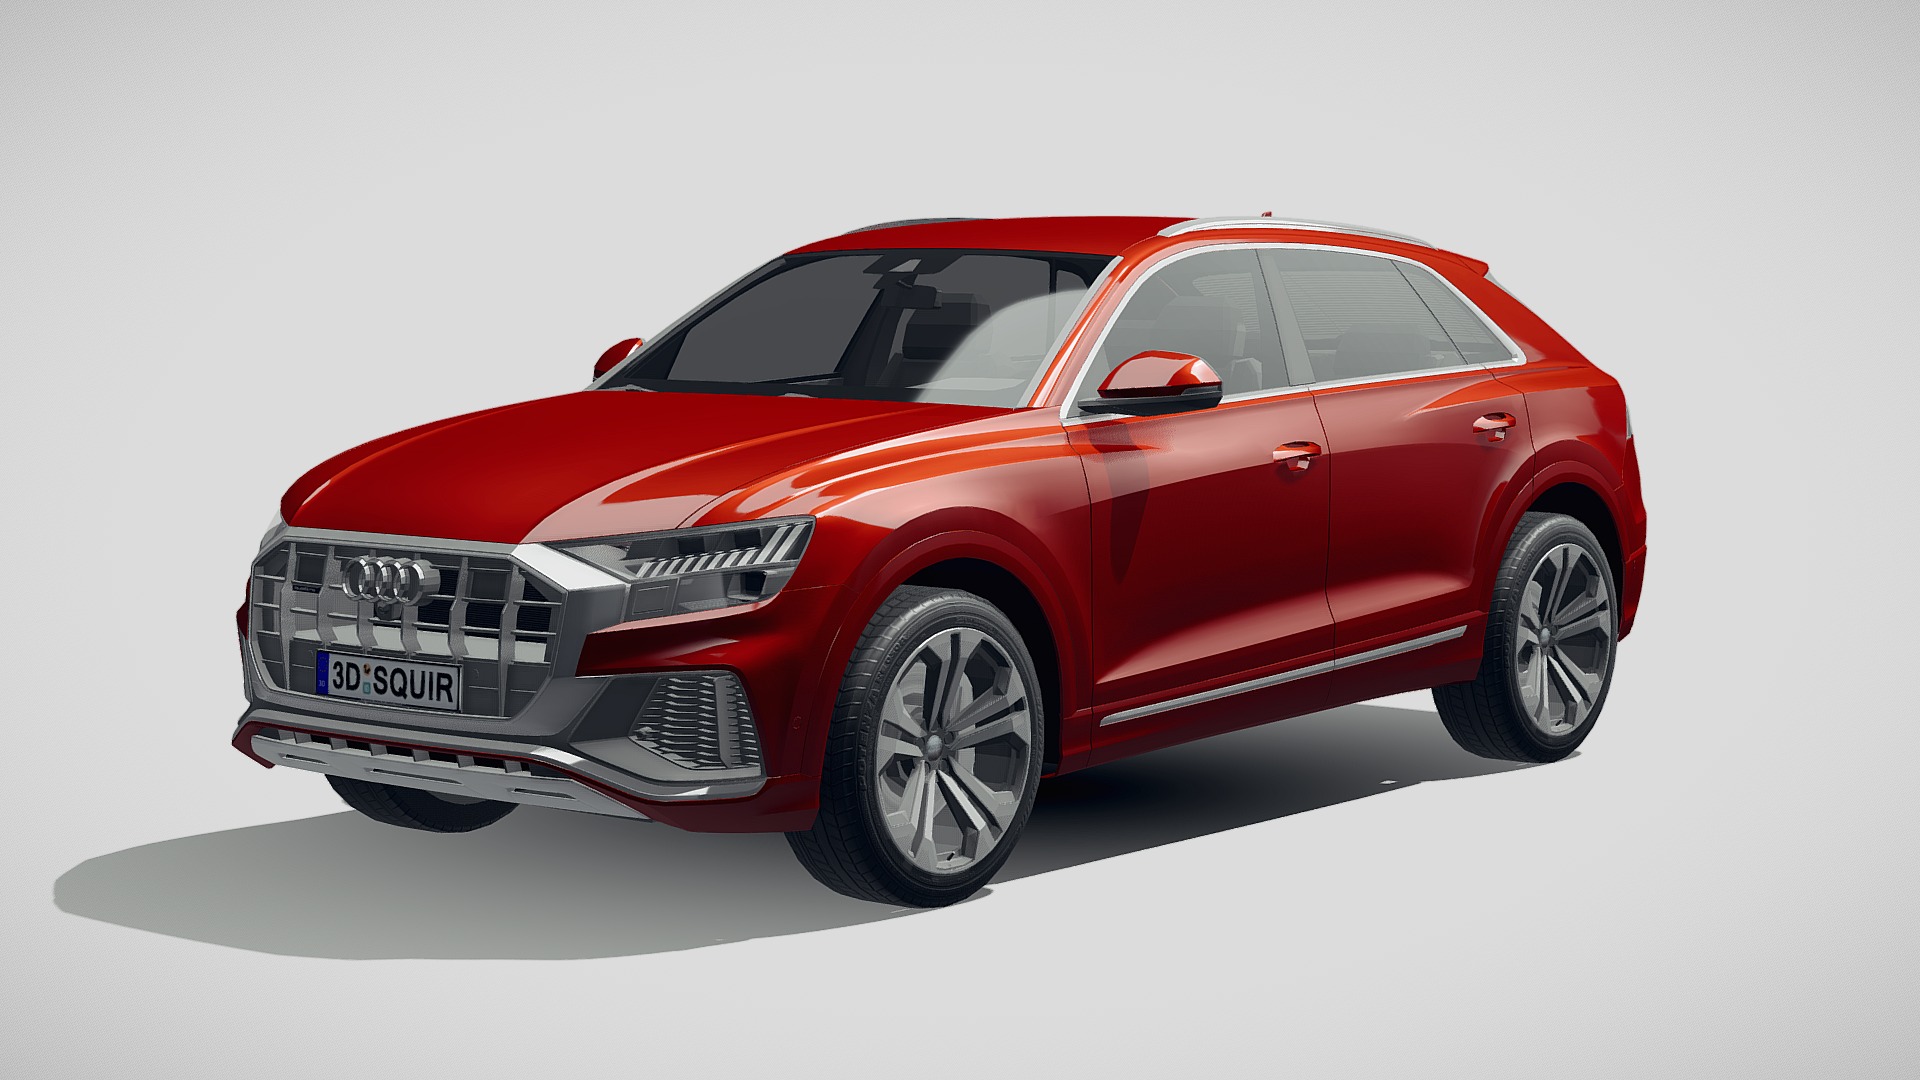 3D model LowPoly Audi Q8 S-line 2019 - This is a 3D model of the LowPoly Audi Q8 S-line 2019. The 3D model is about a red car with a white background.